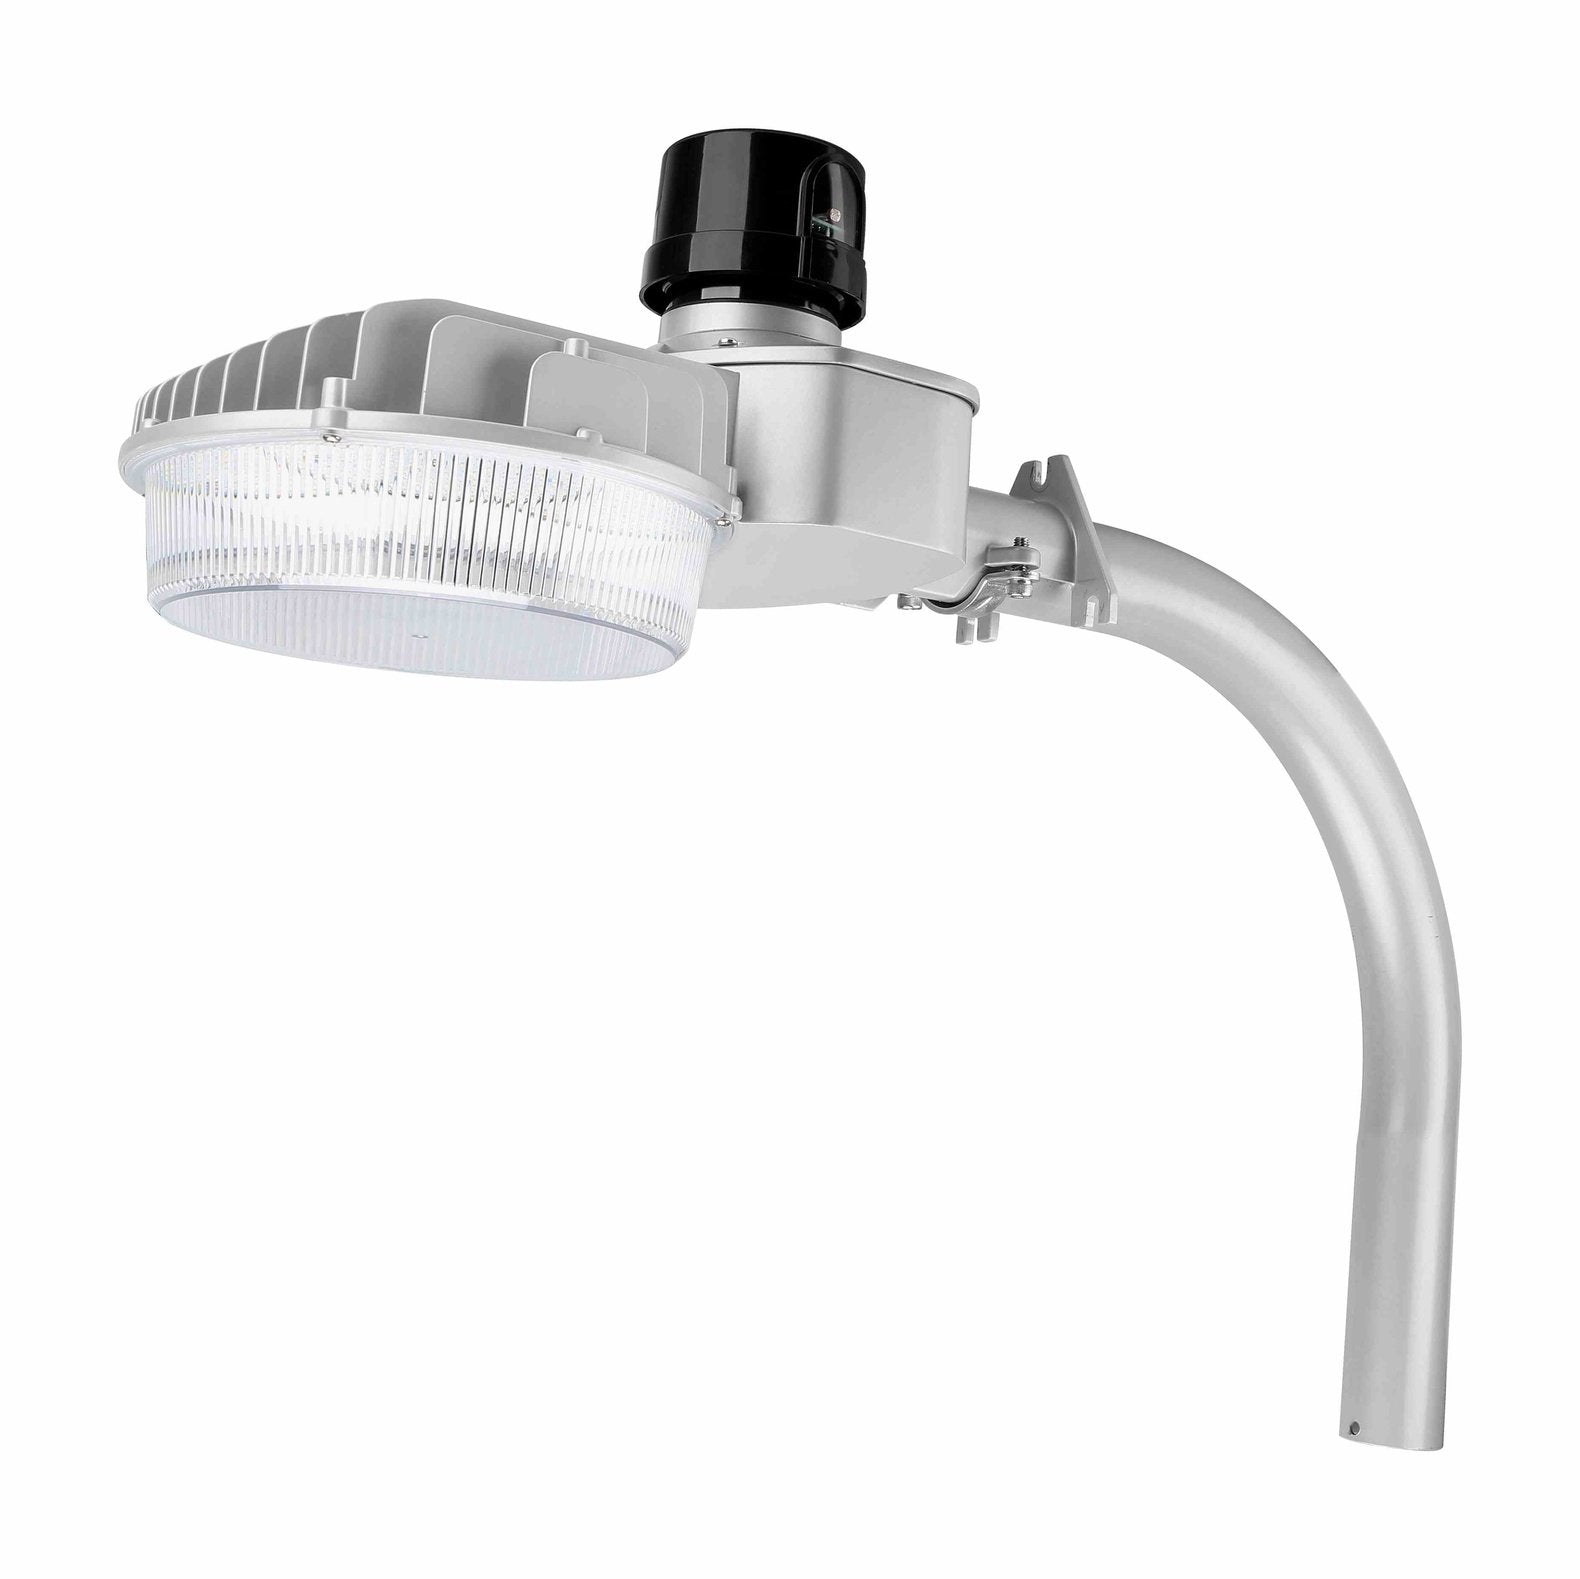 MDD05 LED Dusk to Dawn Barn Light with Photocell 65W, 8800LM, 120-277VAC, 5000K, Silver Gray